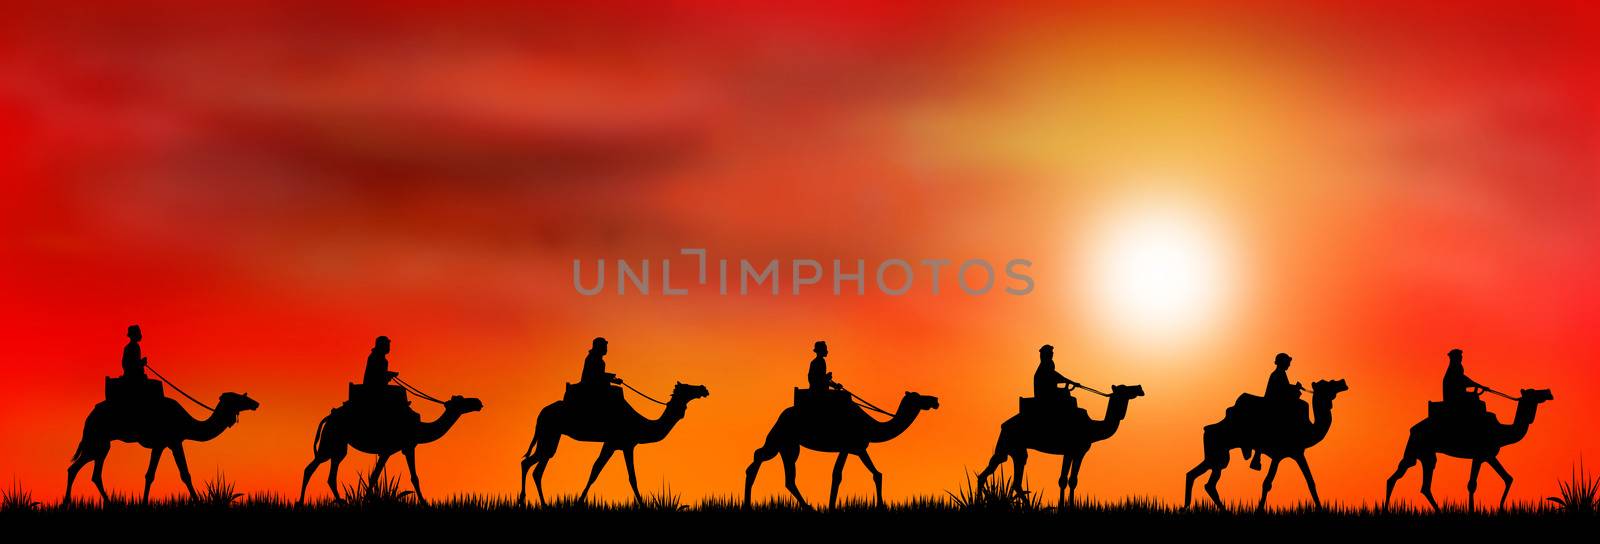 Silhouettes of riders on camels on the background of sunset.                                                                 